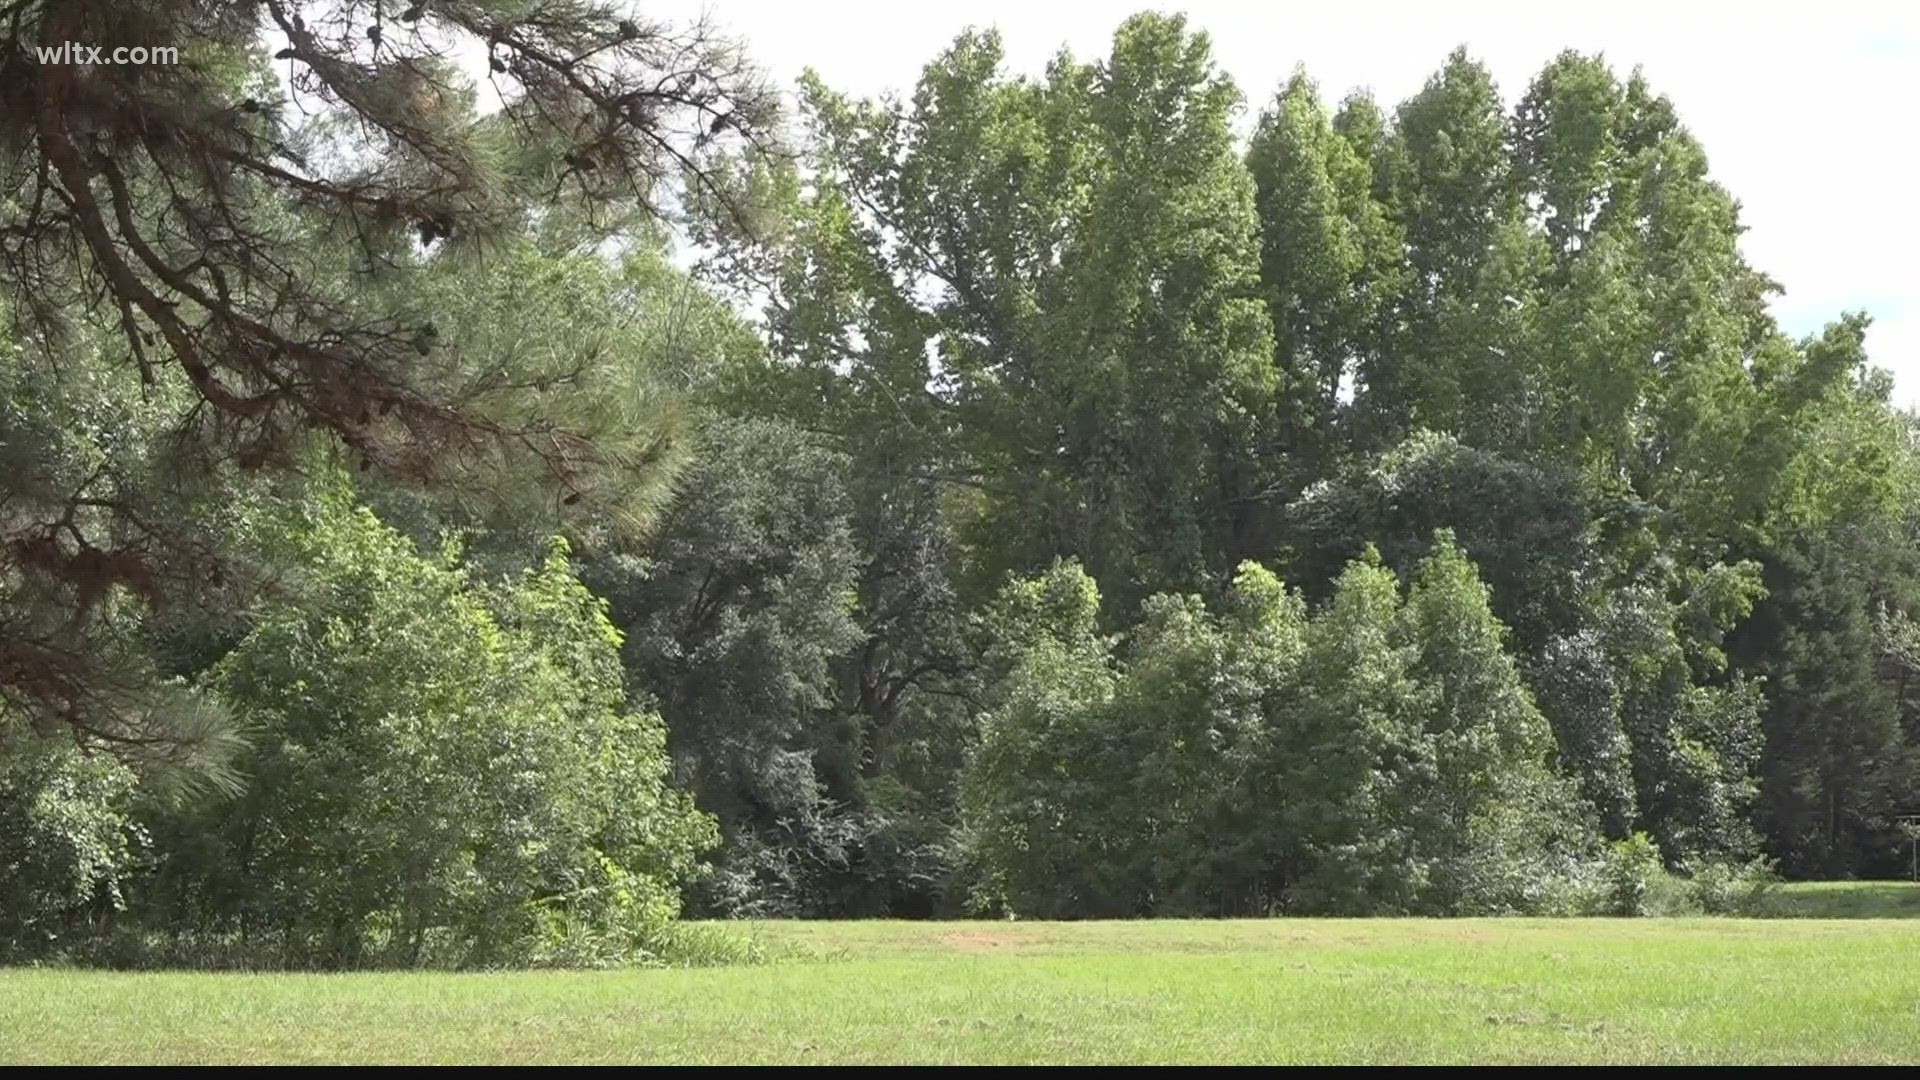 A grant from the Forestry Service will help SC State improve green spaces in some underserved communities.